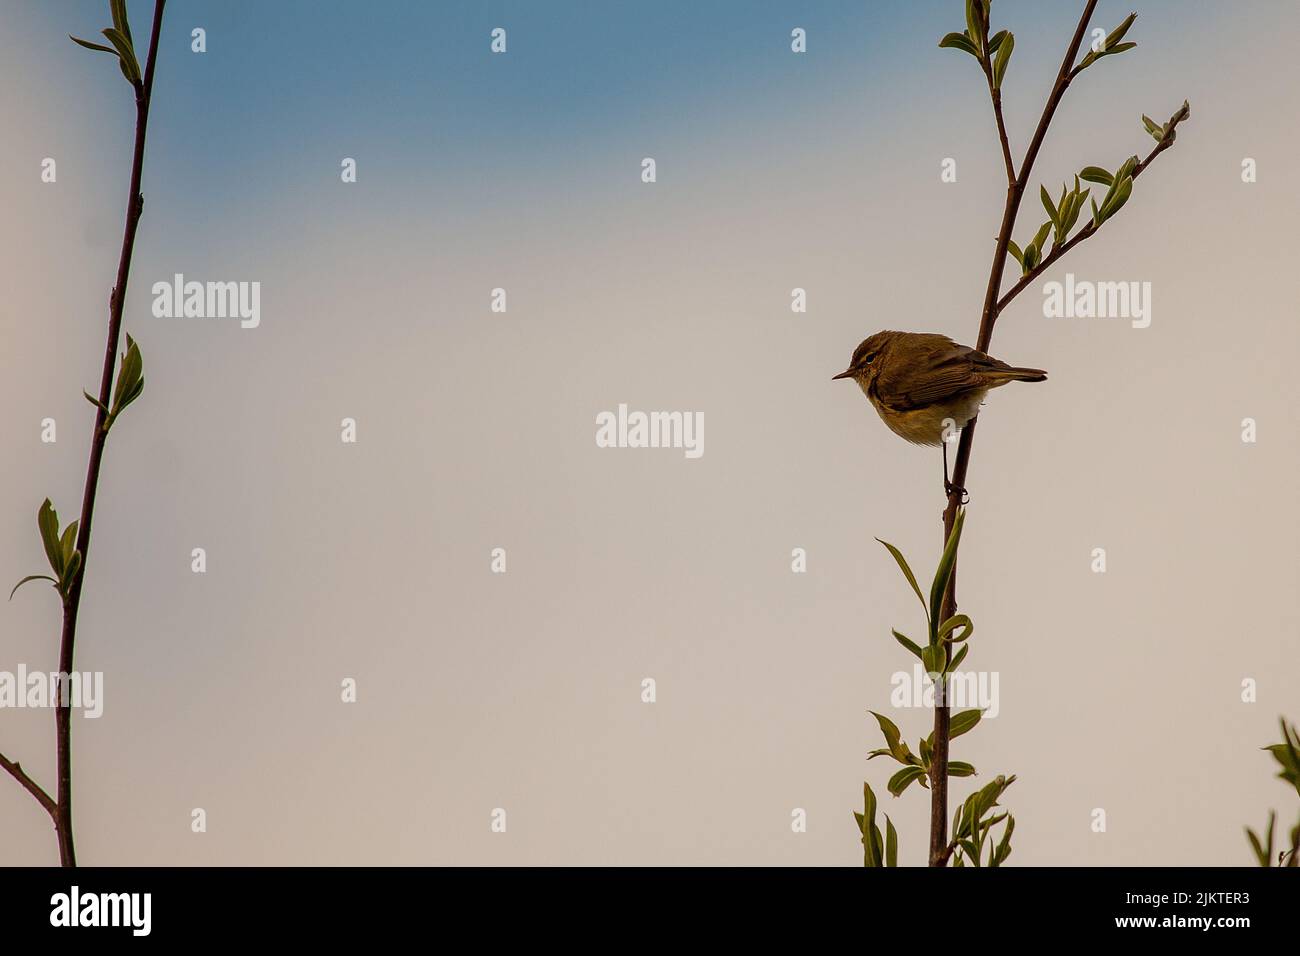 A selective focus of a bird perched on a tree branch Stock Photo